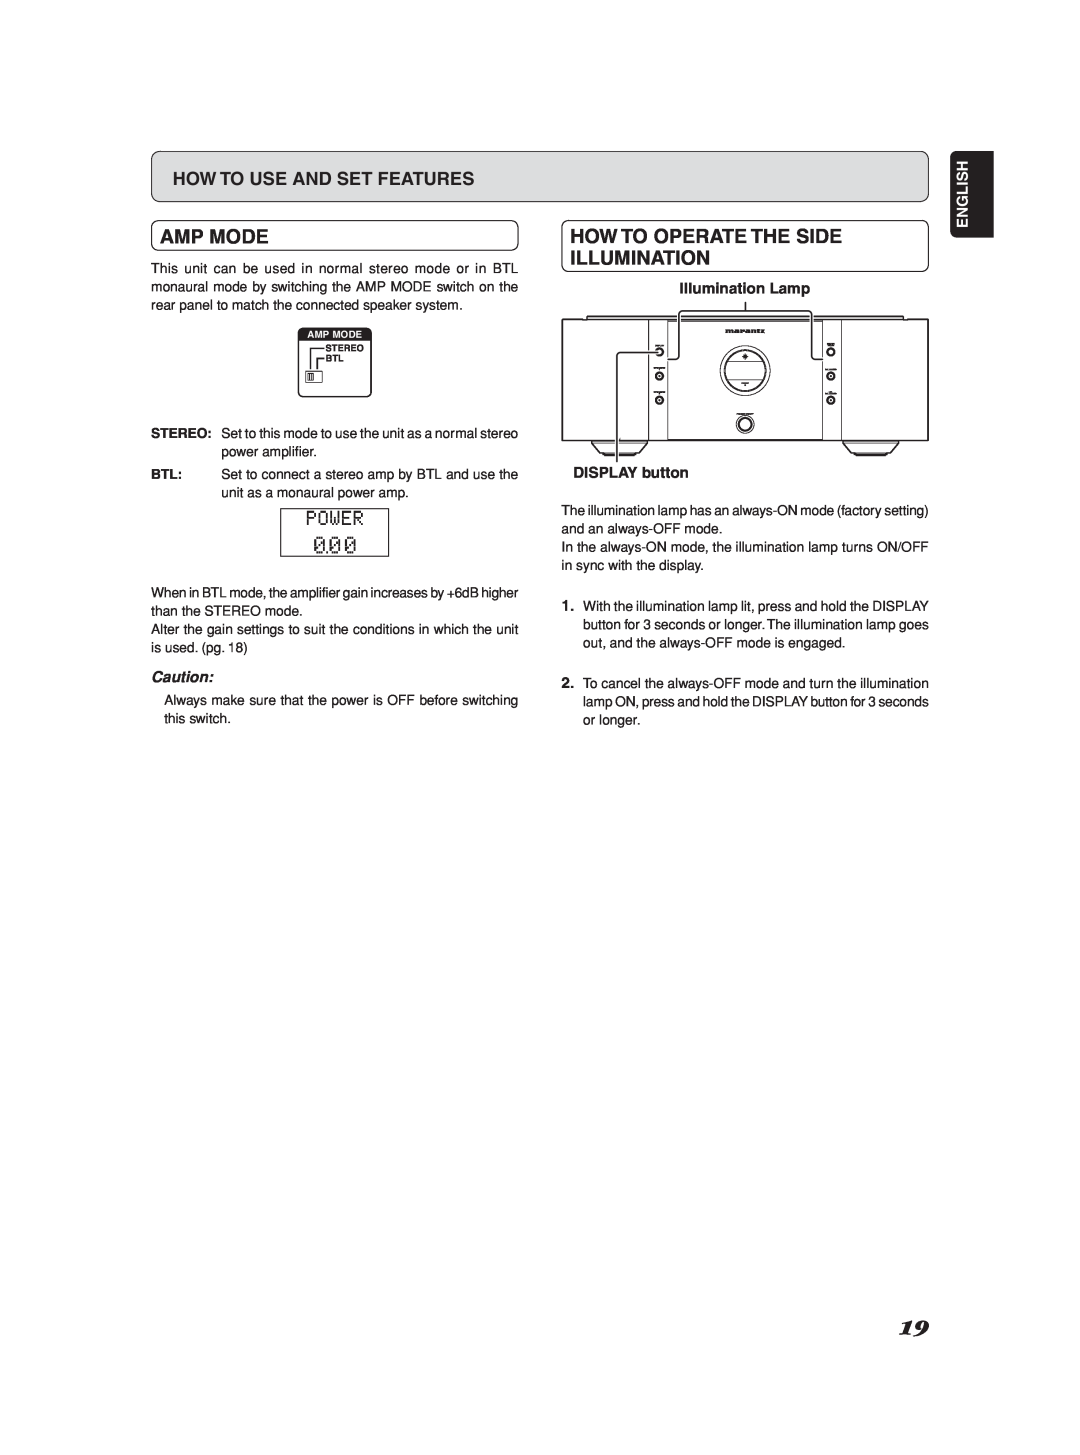 Marantz SM-1151 manual Amp Mode, How To Operate The Side Illumination, How To Use And Set Features, English 